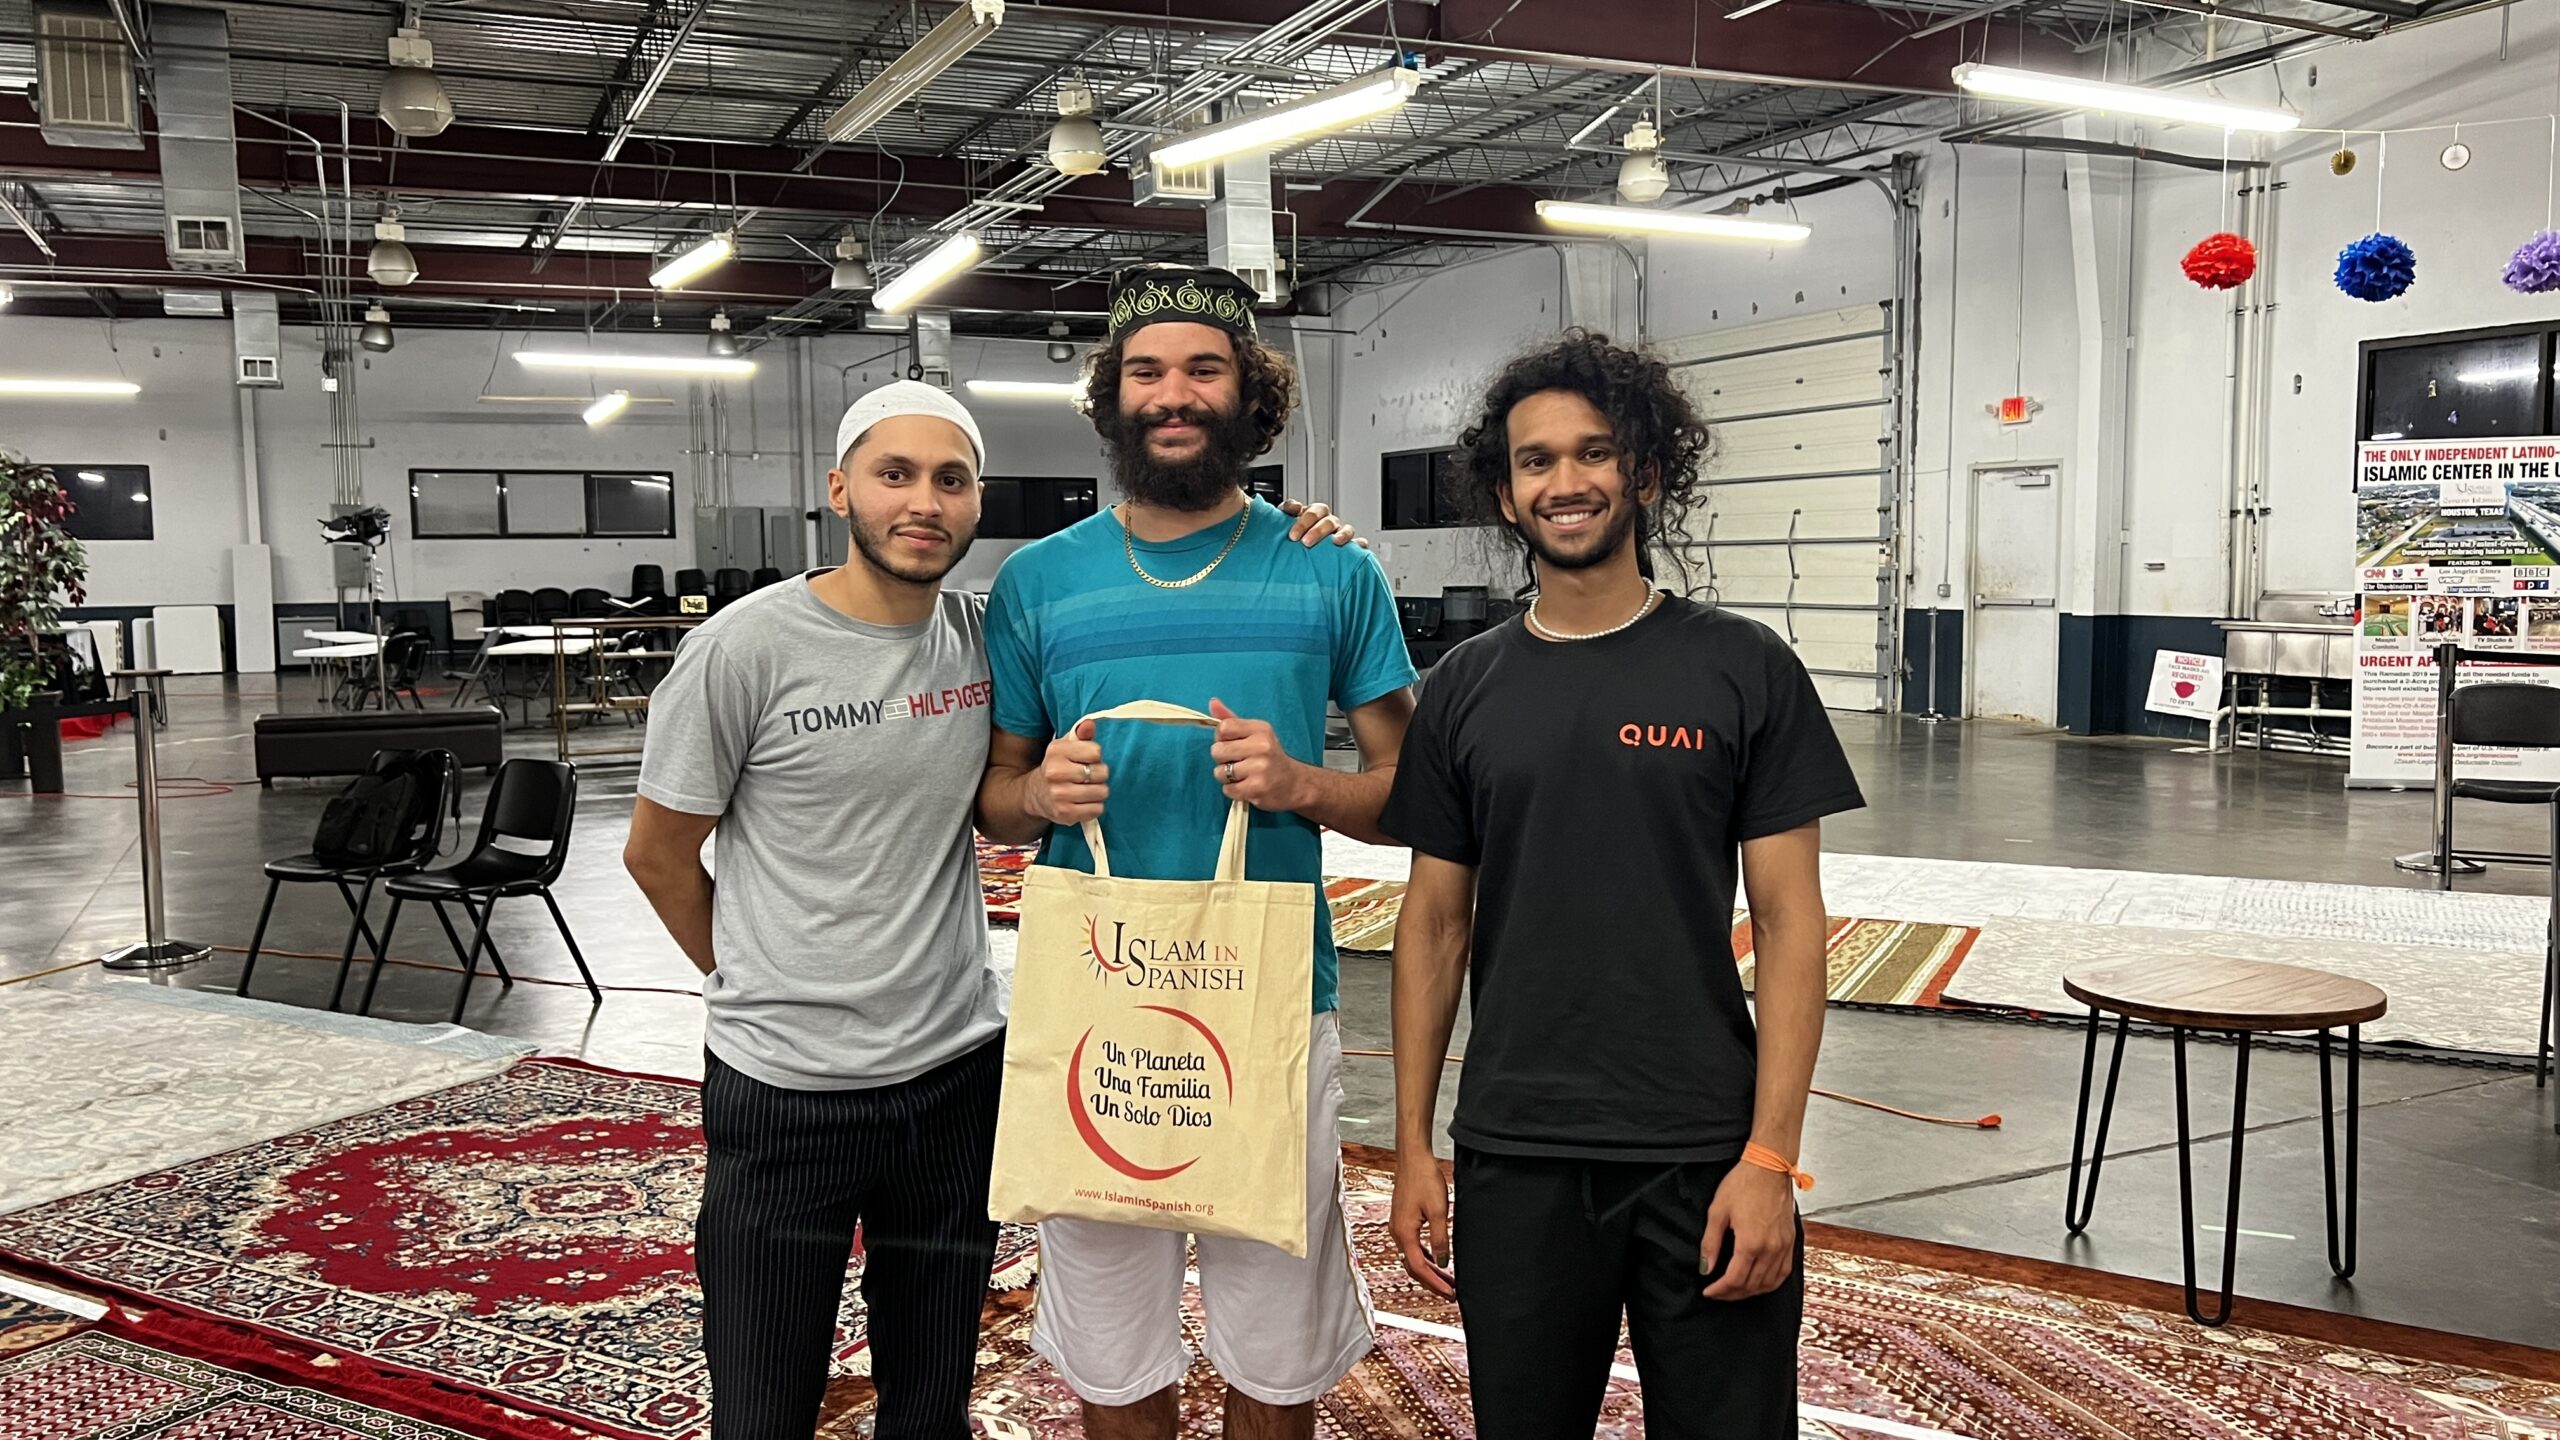 Kaden (middle) after accepting Islam at the IslamInSpanish Centro Islamico in Houston, TX.